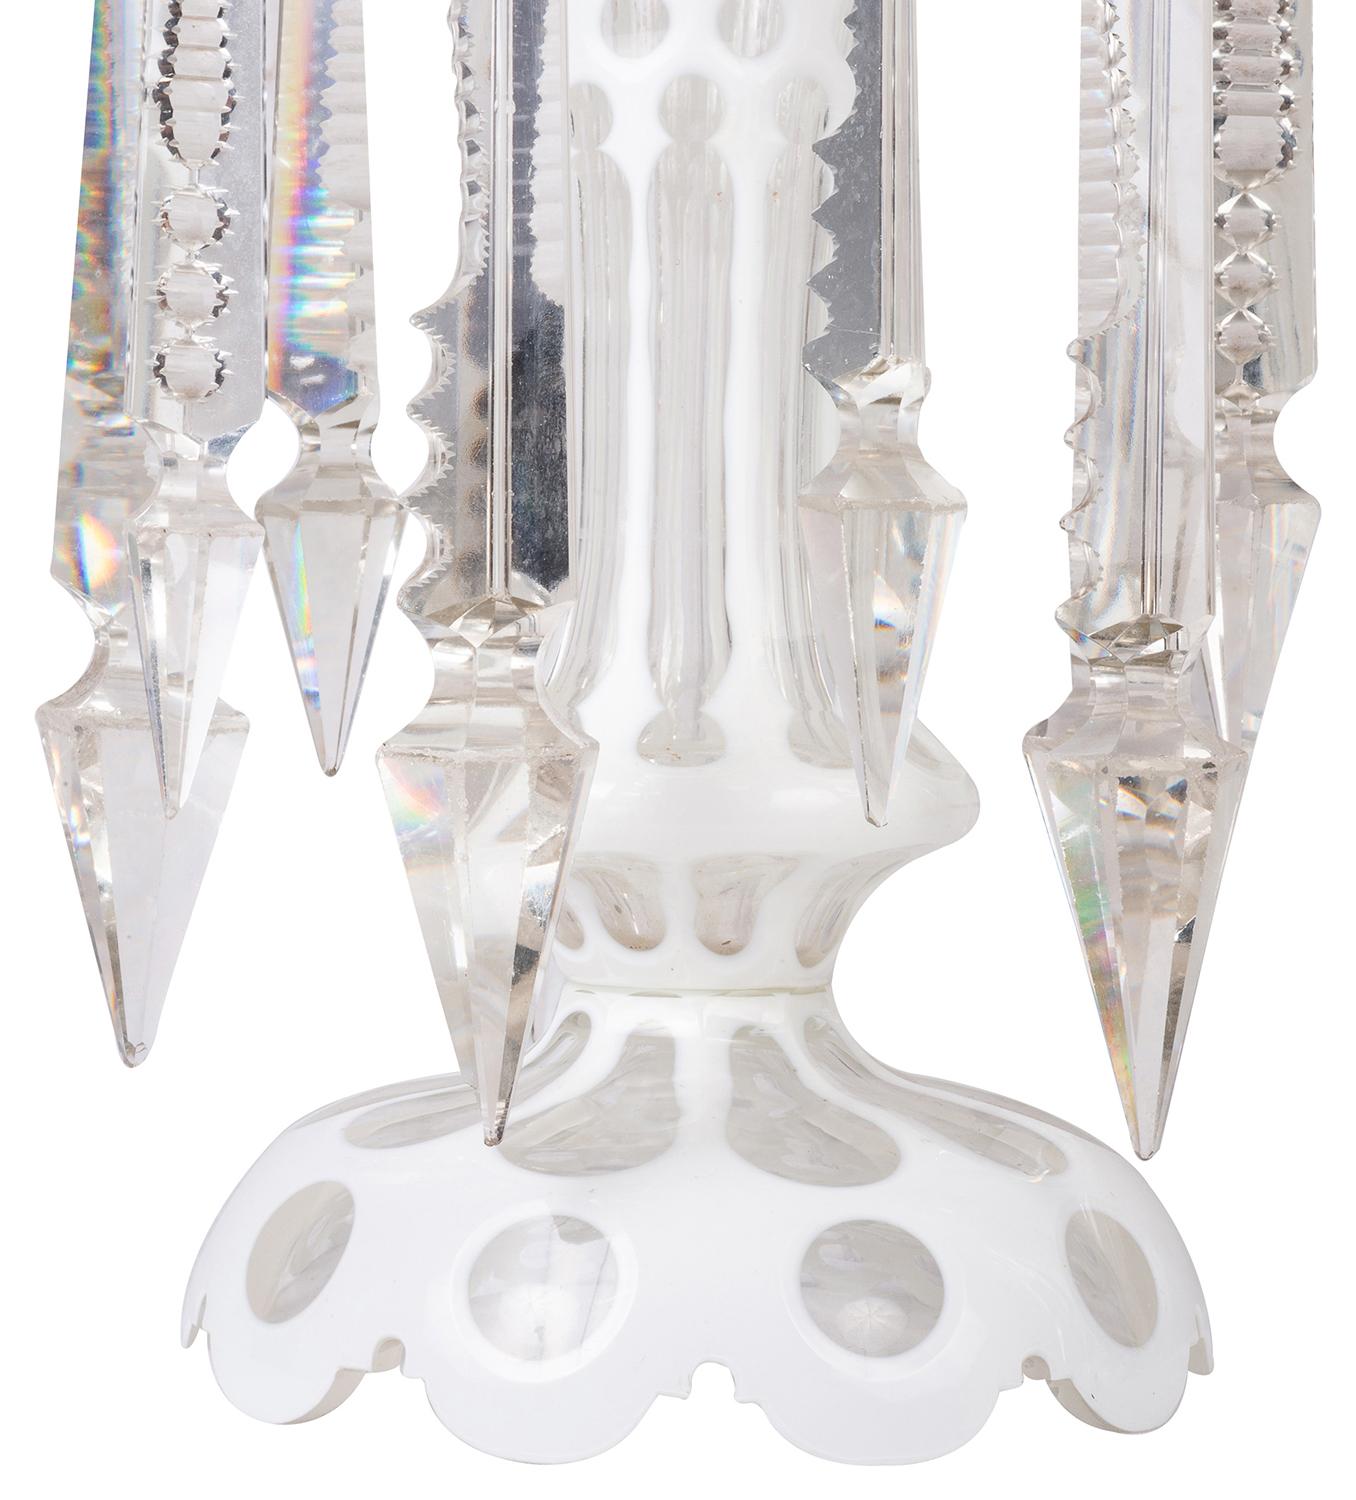 A very decorative good quality pair of late 19th century Bohemian cut glass lusters, each with facetted drops and white overlay decoration.